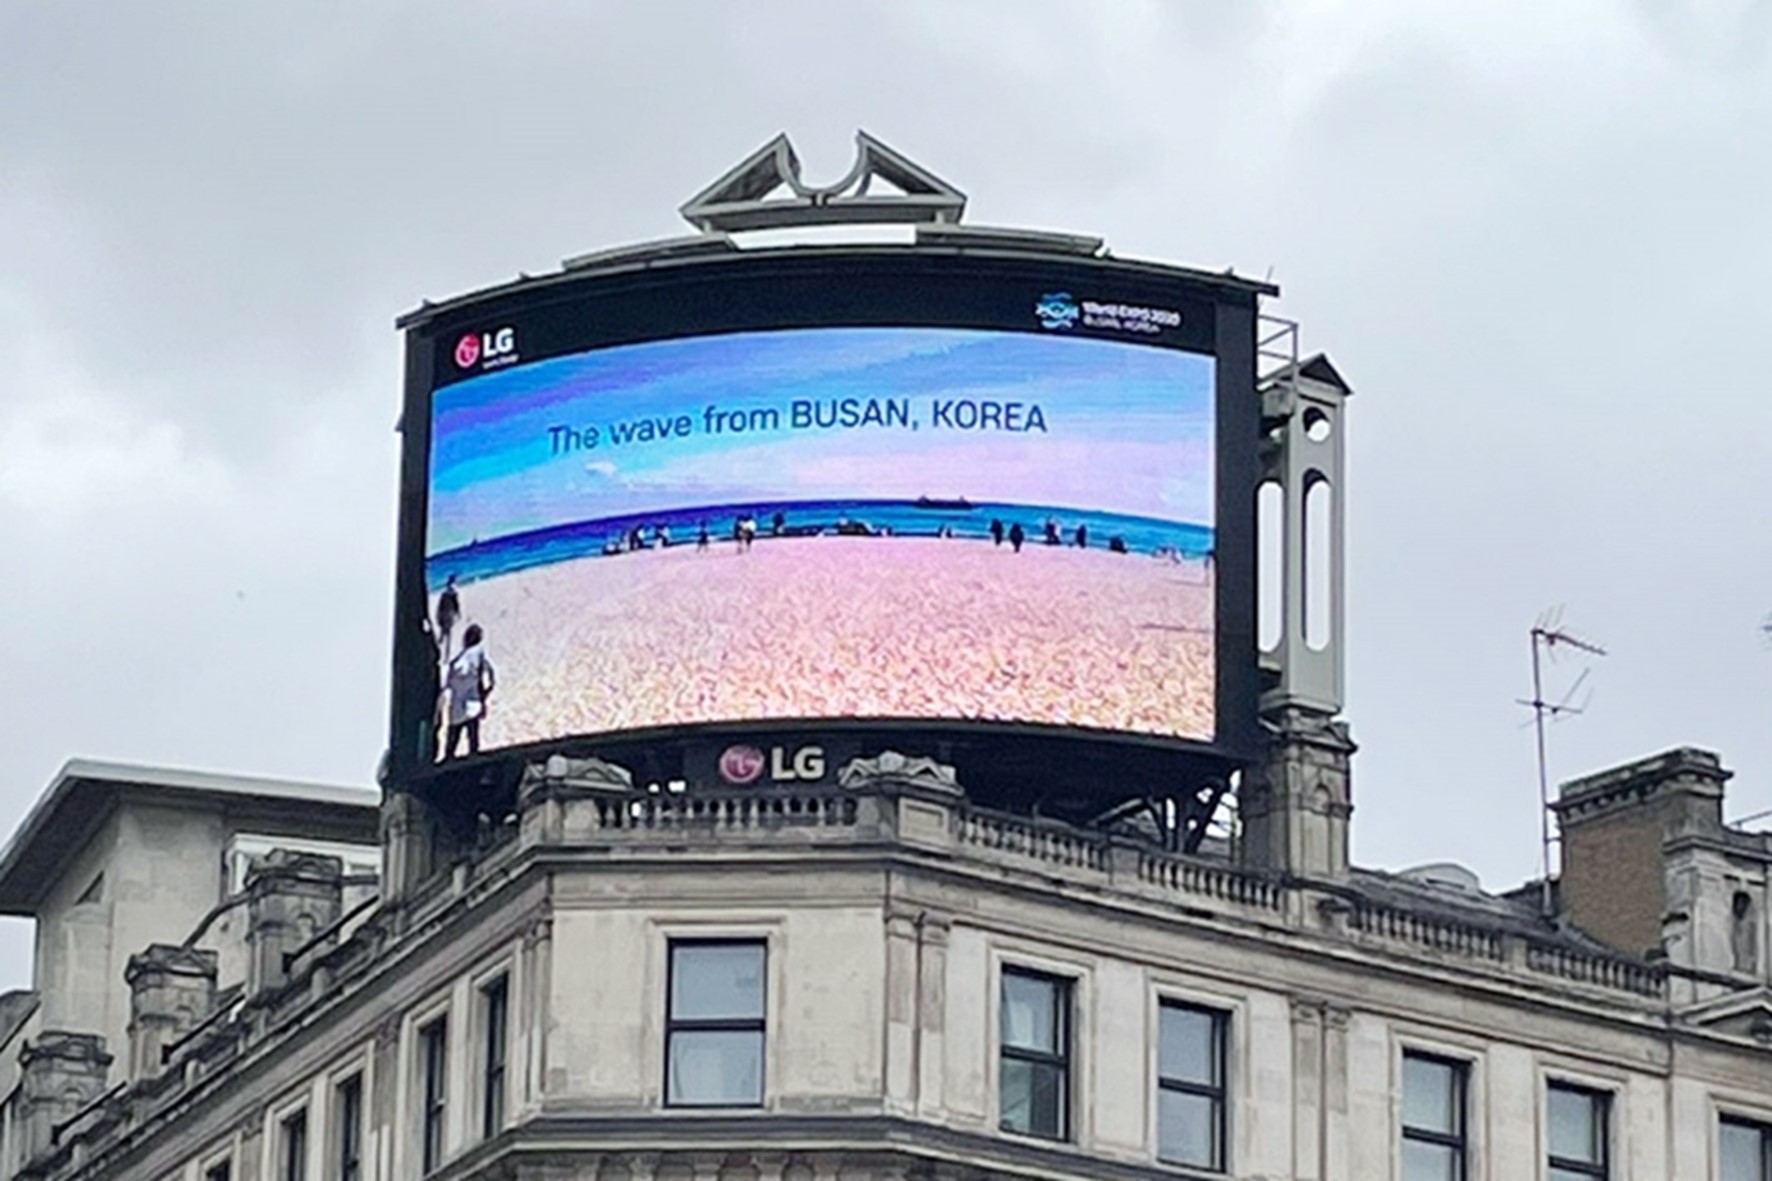 LG's digital billboard in Piccadilly Circus, London displaying a video of Busan, South Korea to promote the city as a host to World Expo 2030